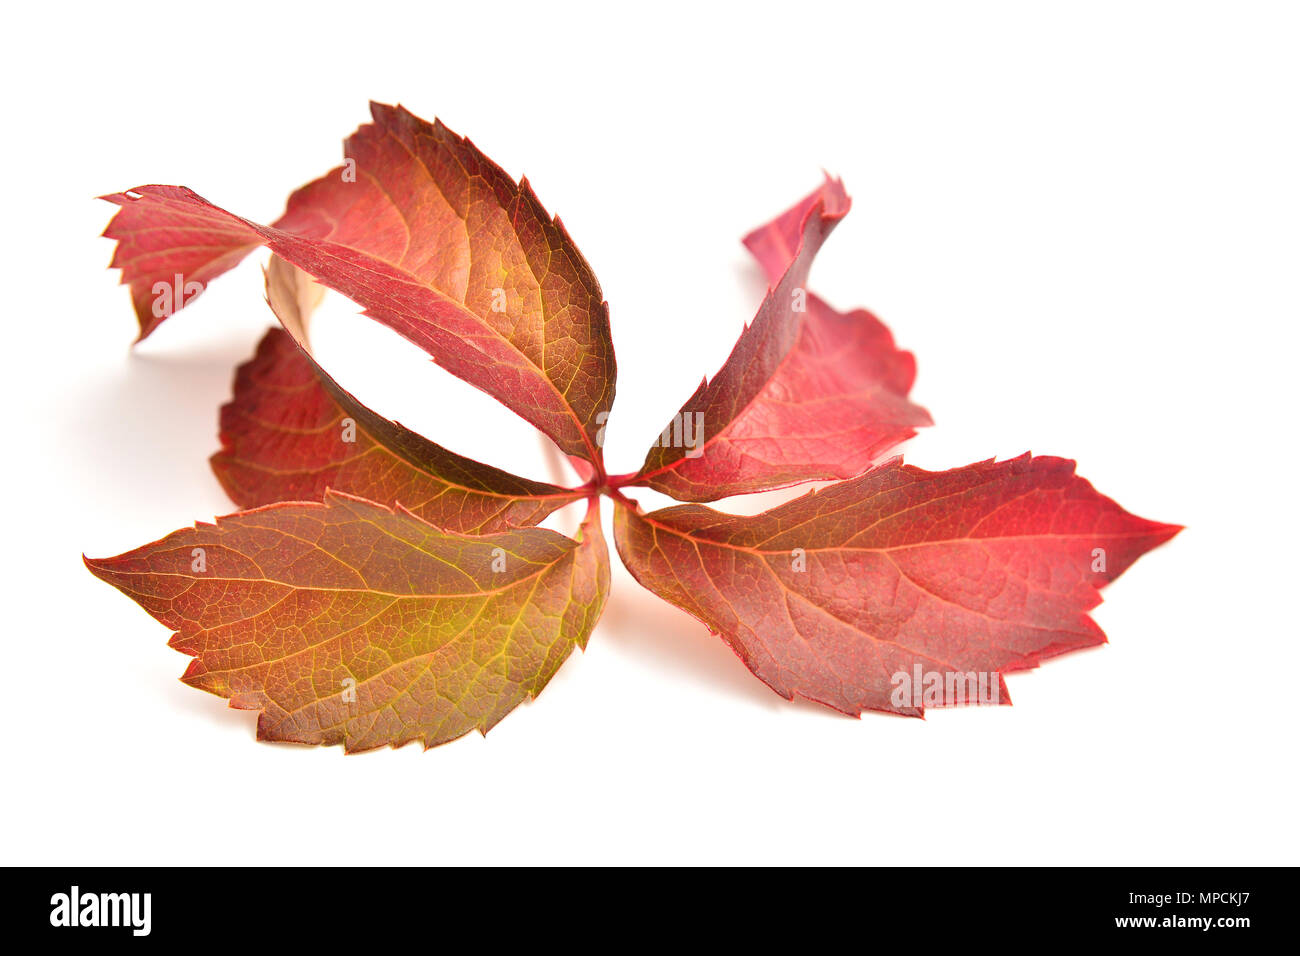 Parthenocissus inserta plant over white background, thicket creeper and  or grape woodbine Stock Photo